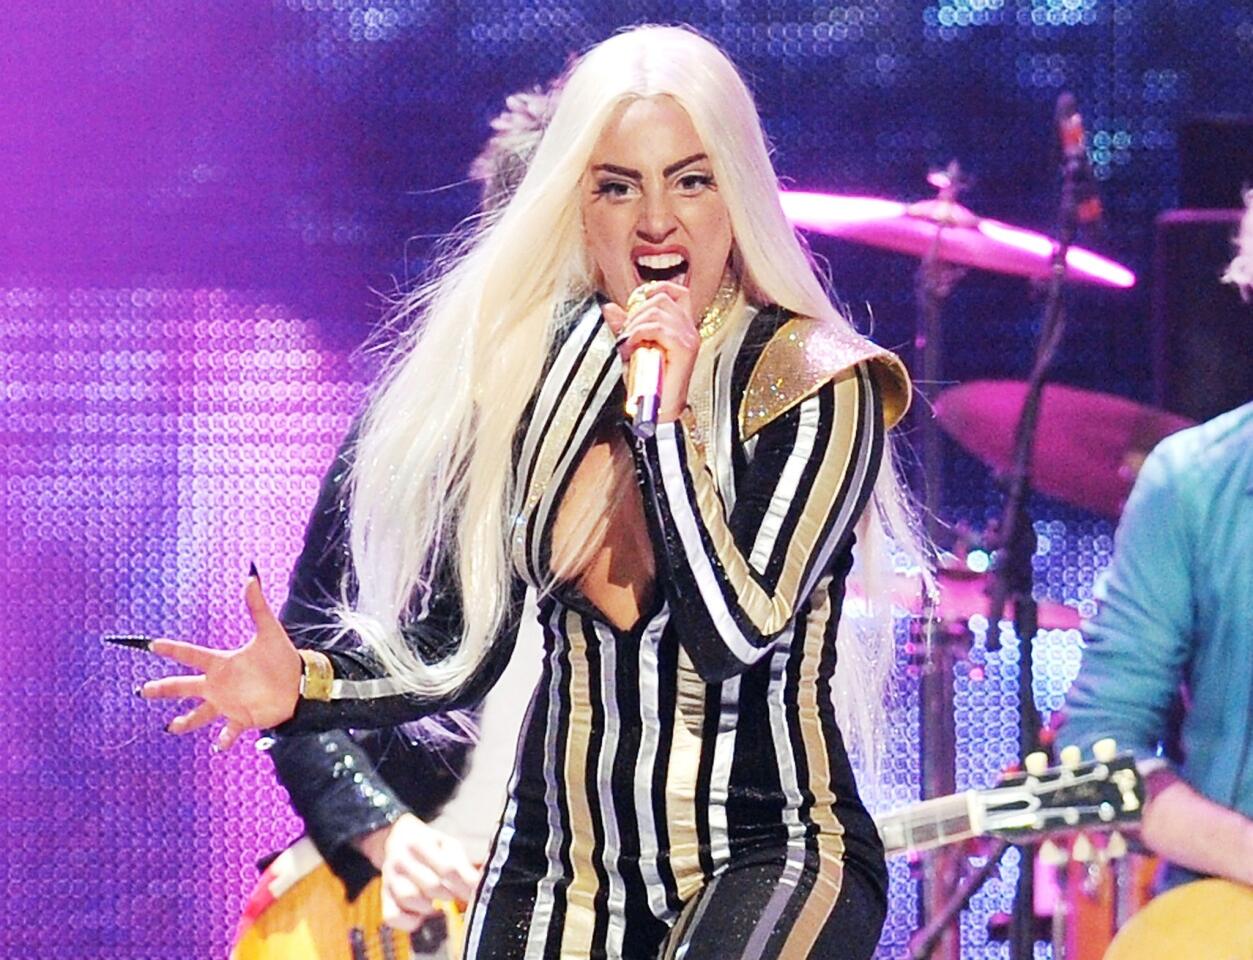 Lady Gaga needs hip surgery, cancels rest of 'Born This Way' tour